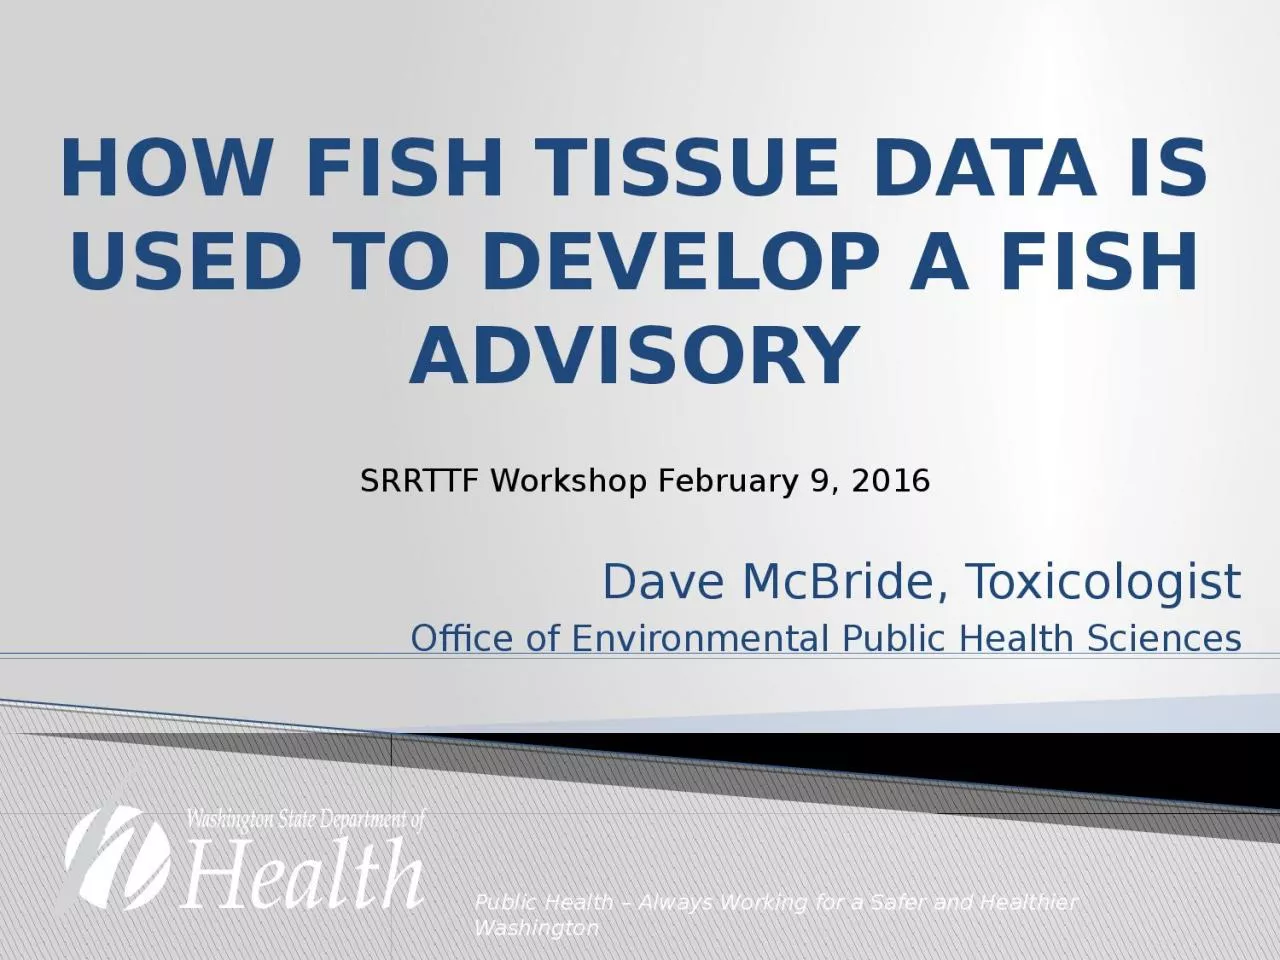 How Fish Tissue Data is Used to Develop a Fish Advisory